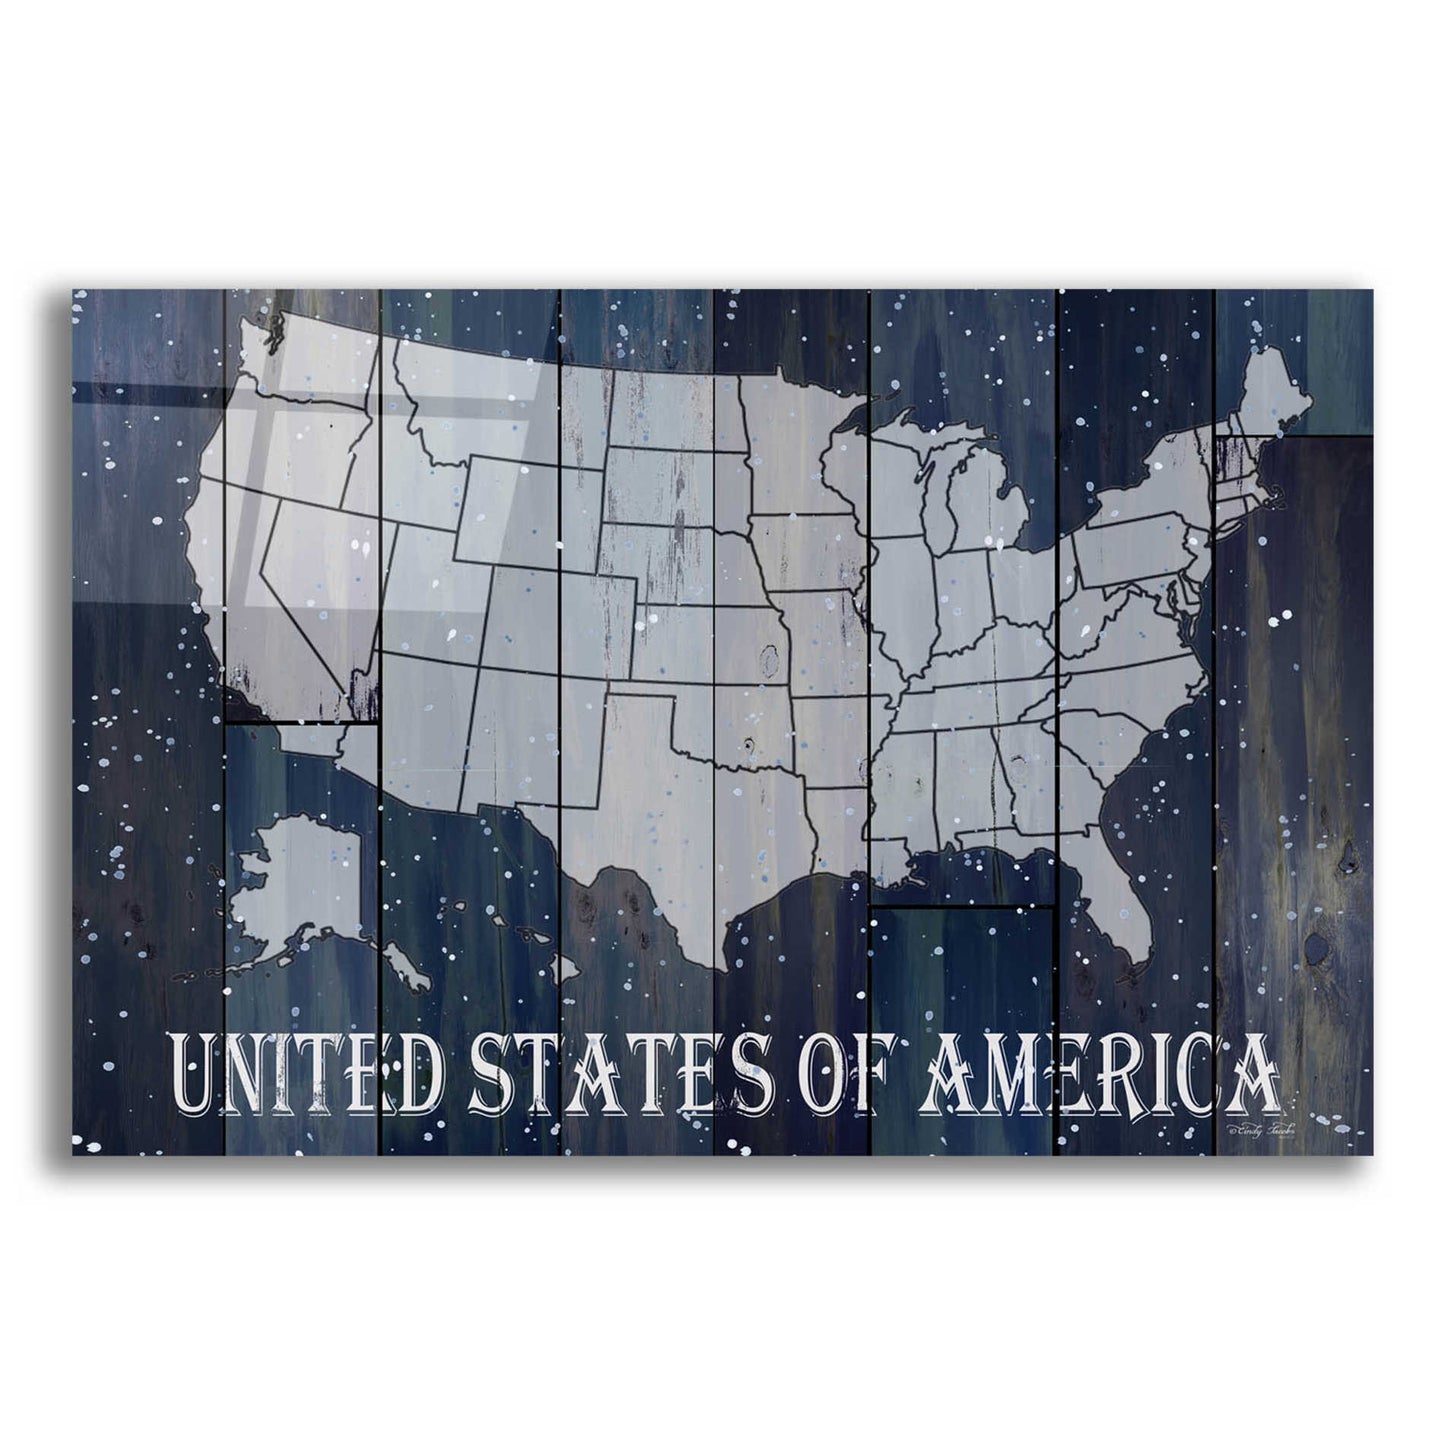 Epic Art 'Navy United States of America' by Cindy Jacobs, Acrylic Glass Wall Art,24x16